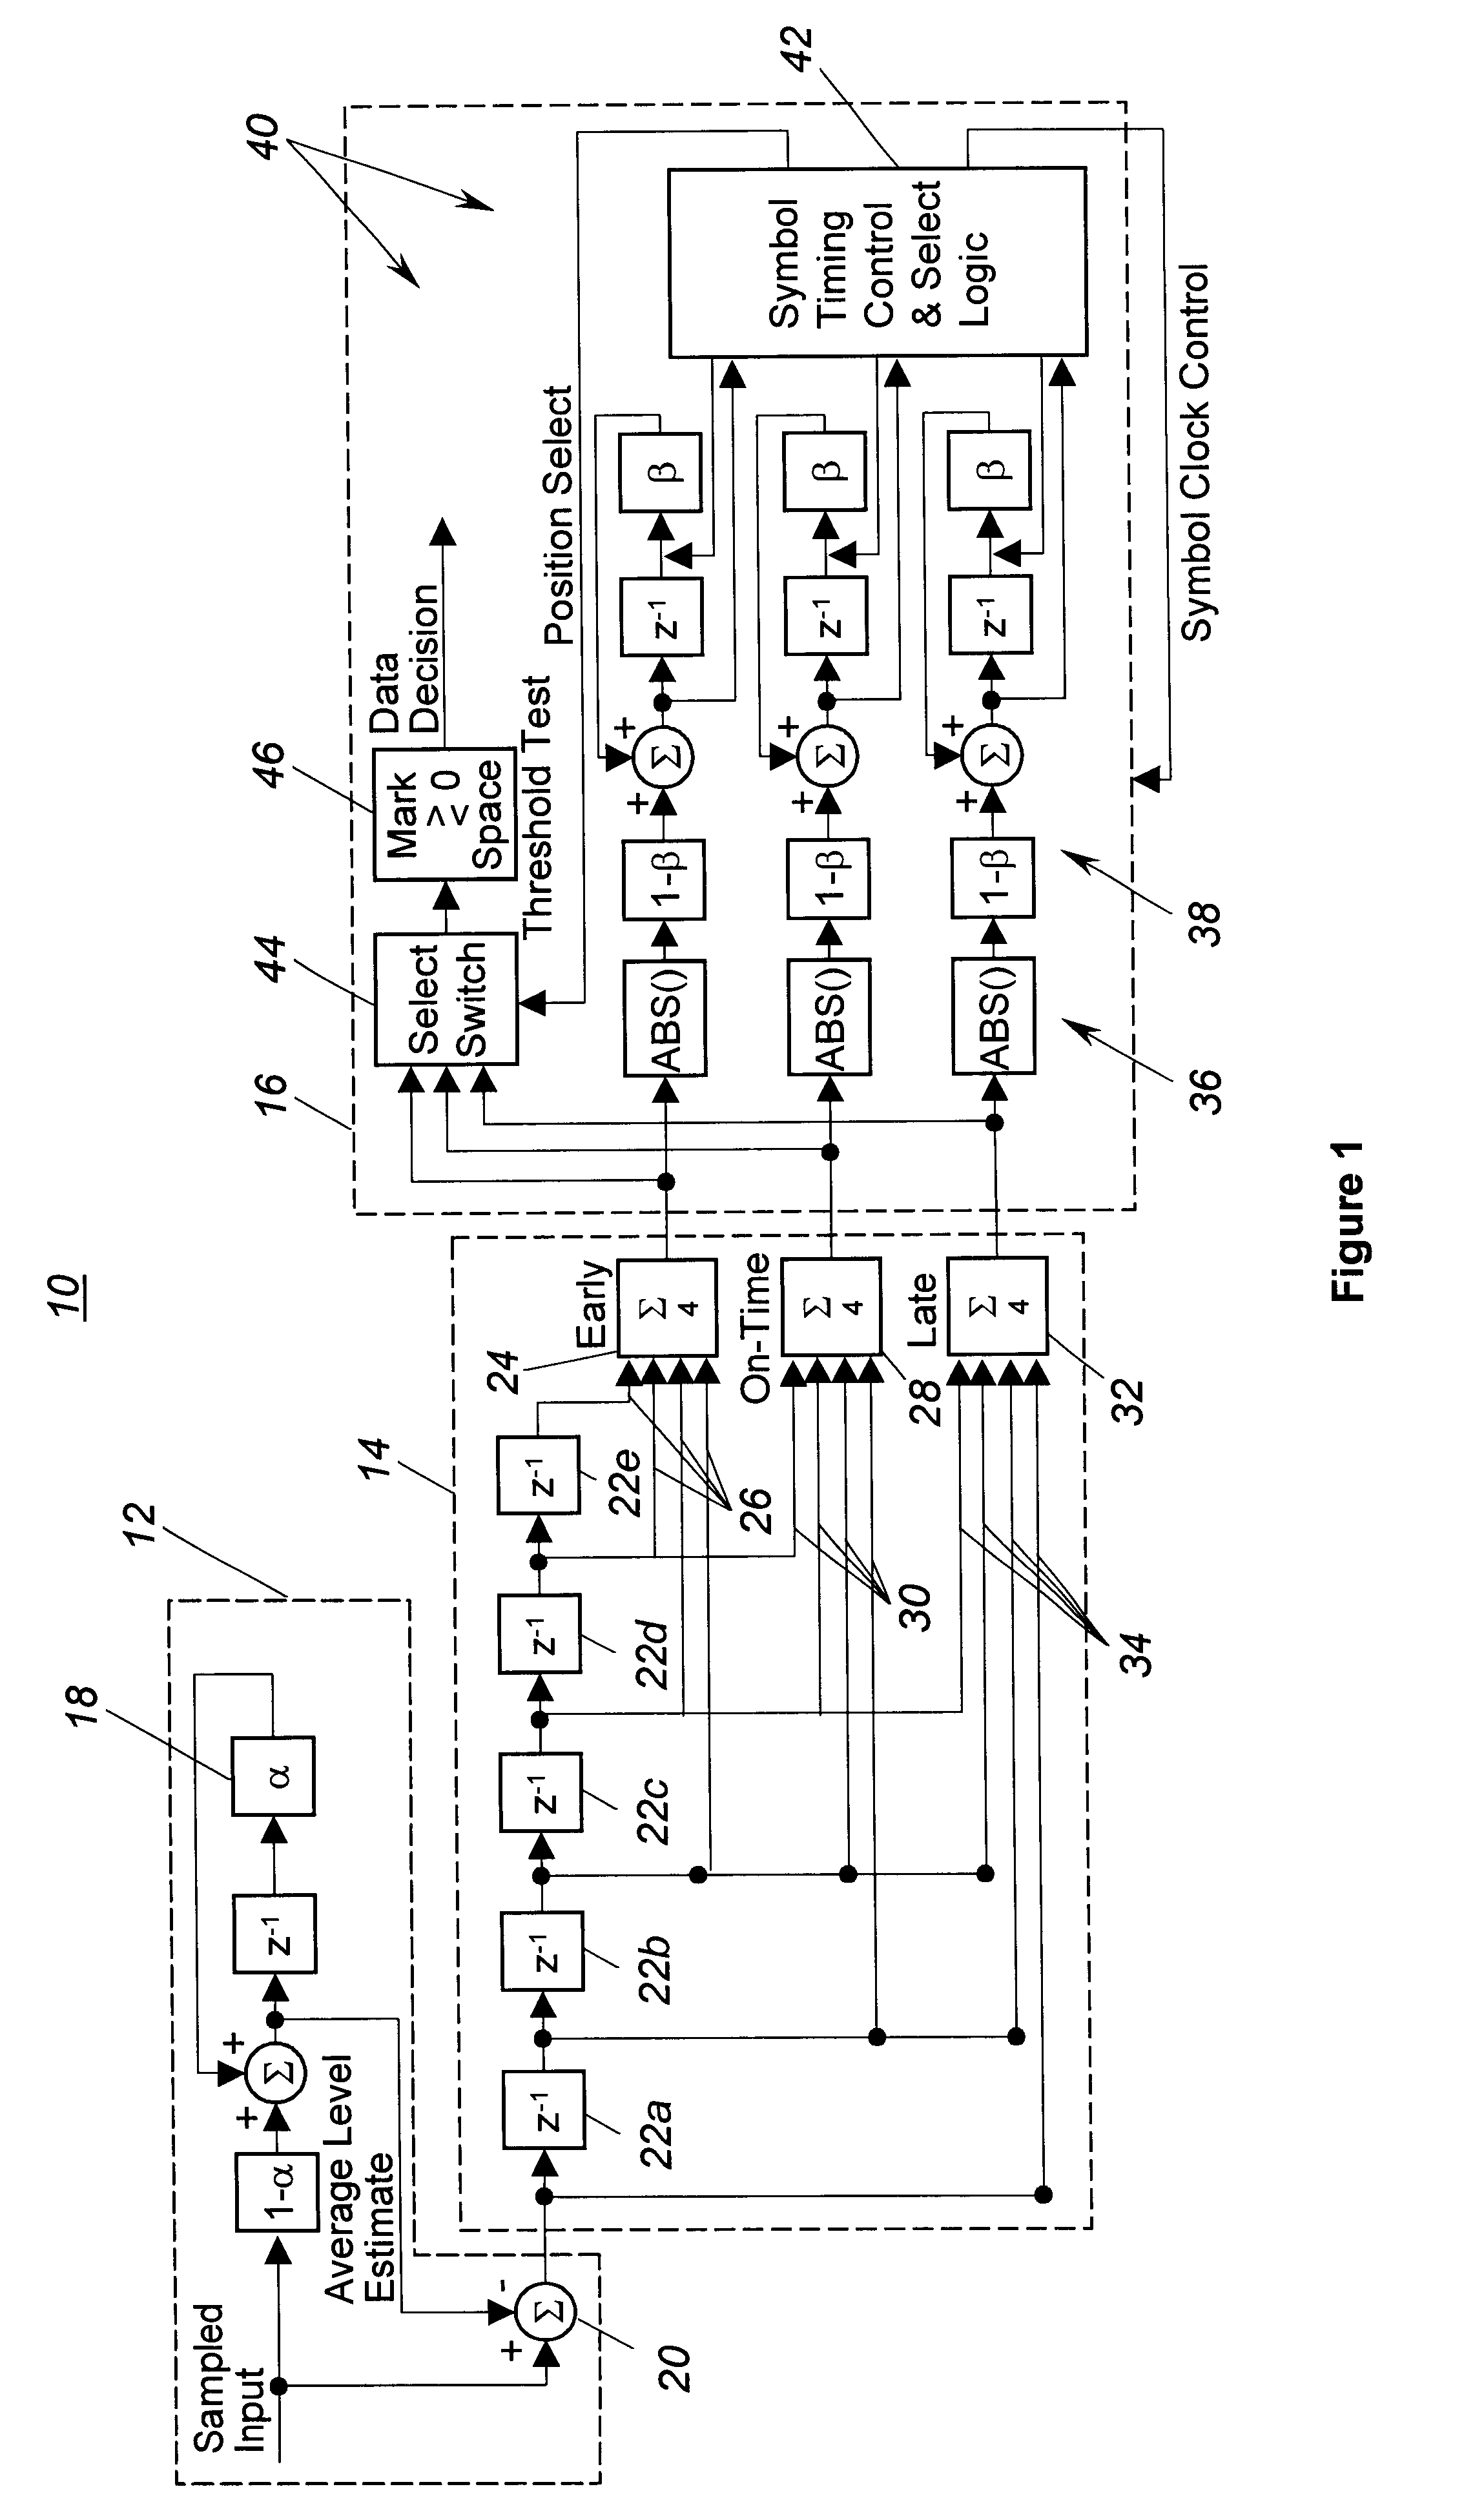 Early/on-time/late gate bit synchronizer